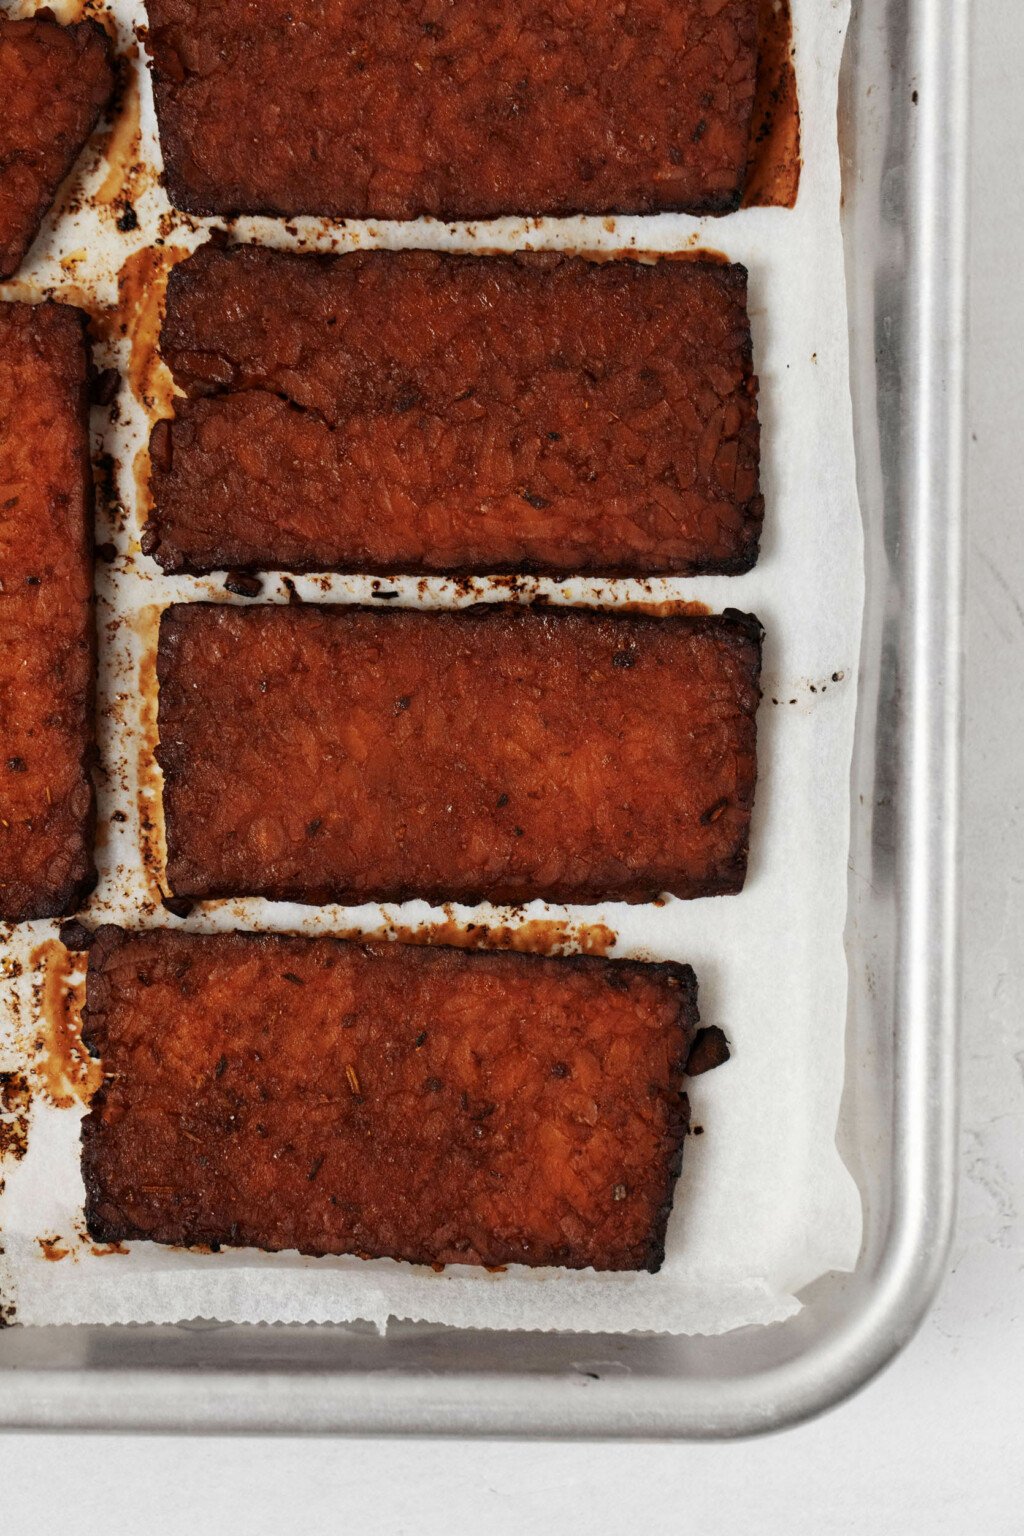 Baked strips of a plant-based protein rest on a lined baking sheet.